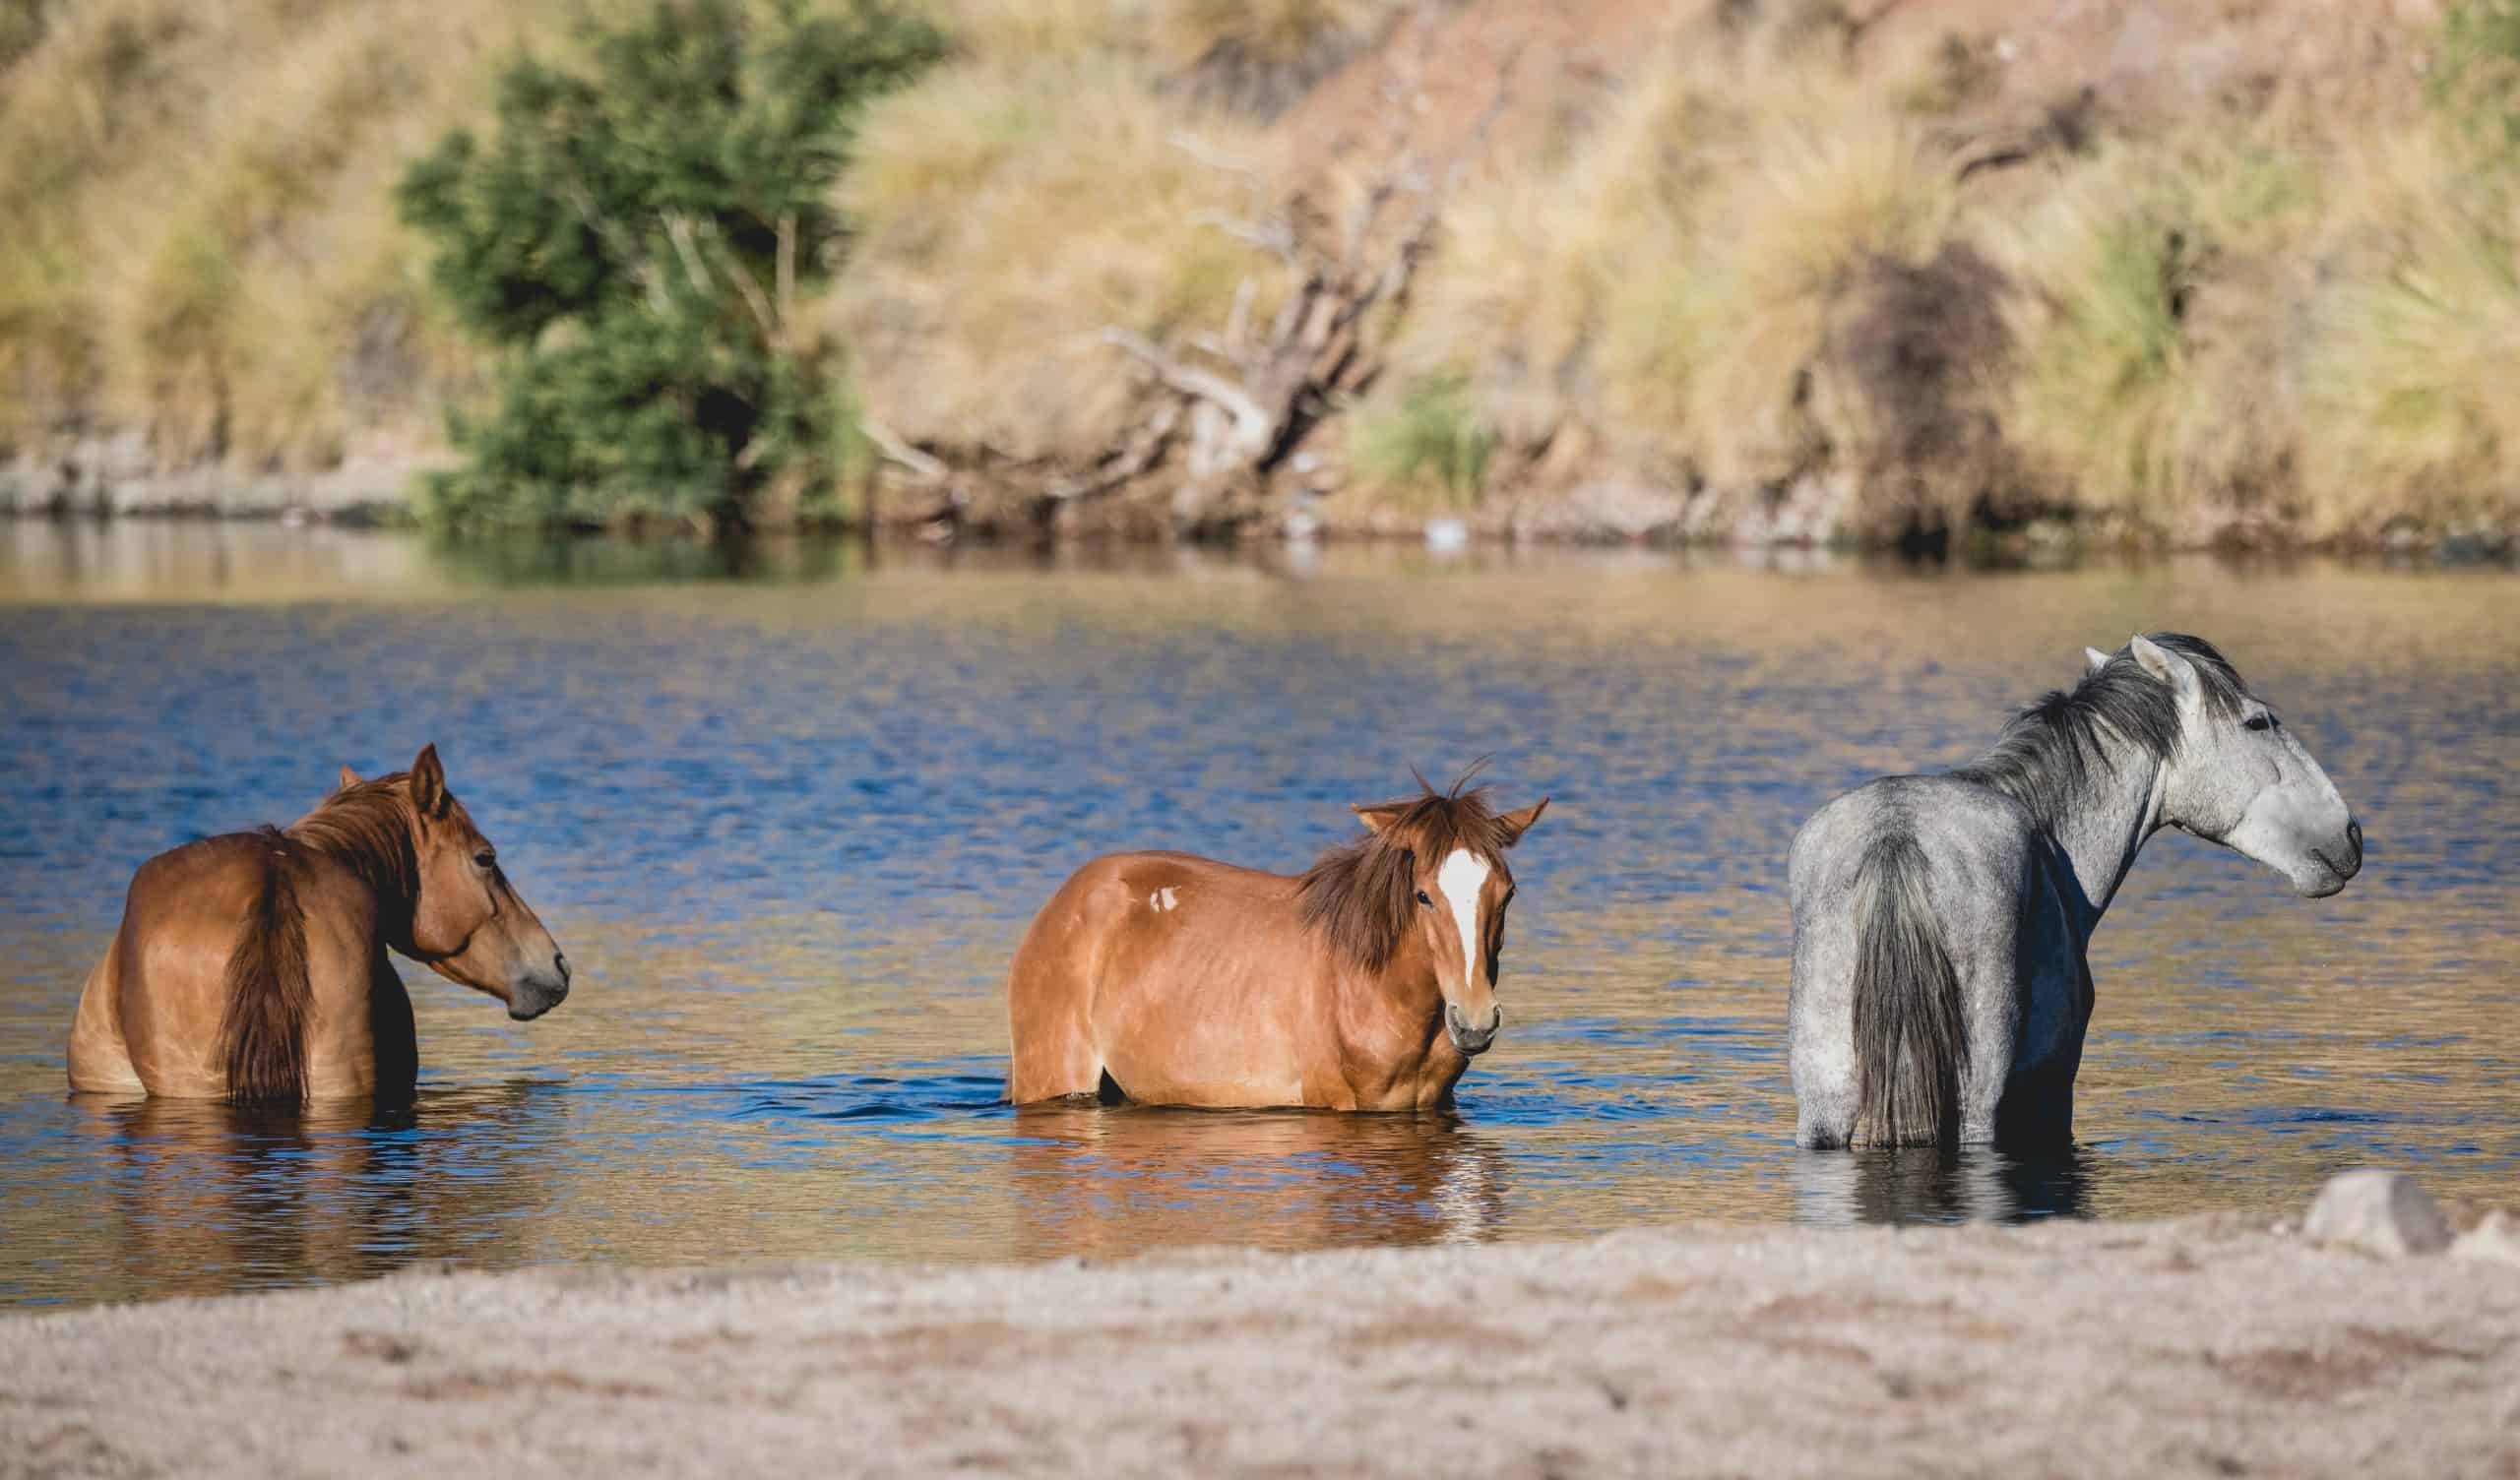 Salt River wild horses cooling off in the river